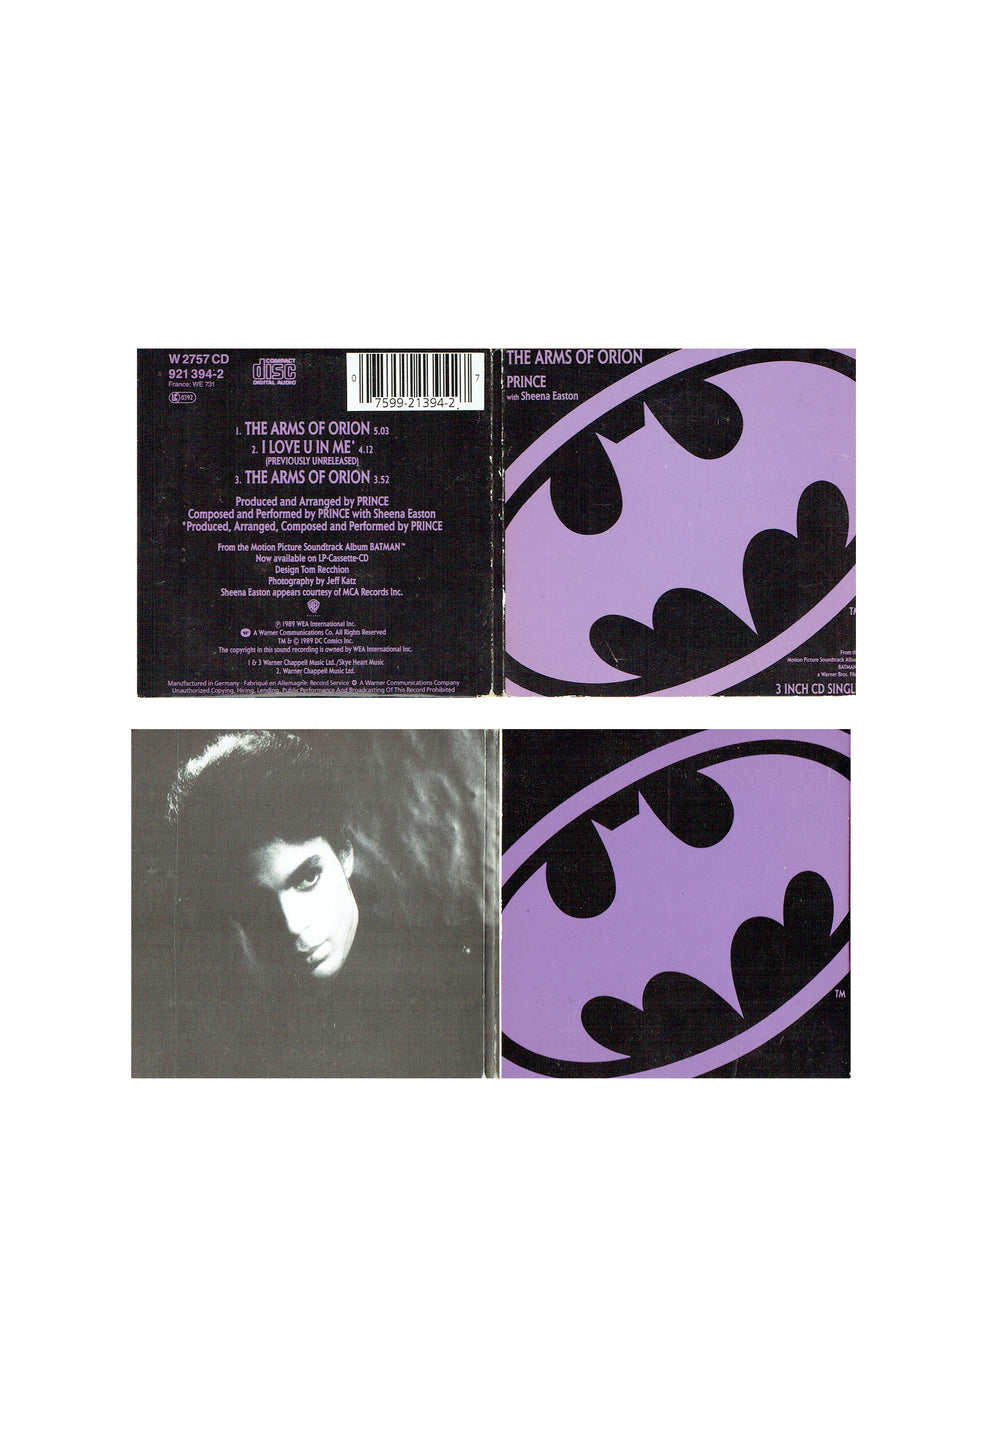 Prince with Sheena Easton The Arms Of Orion UK 3 Inch CD Single 1989 W2757CD SMS